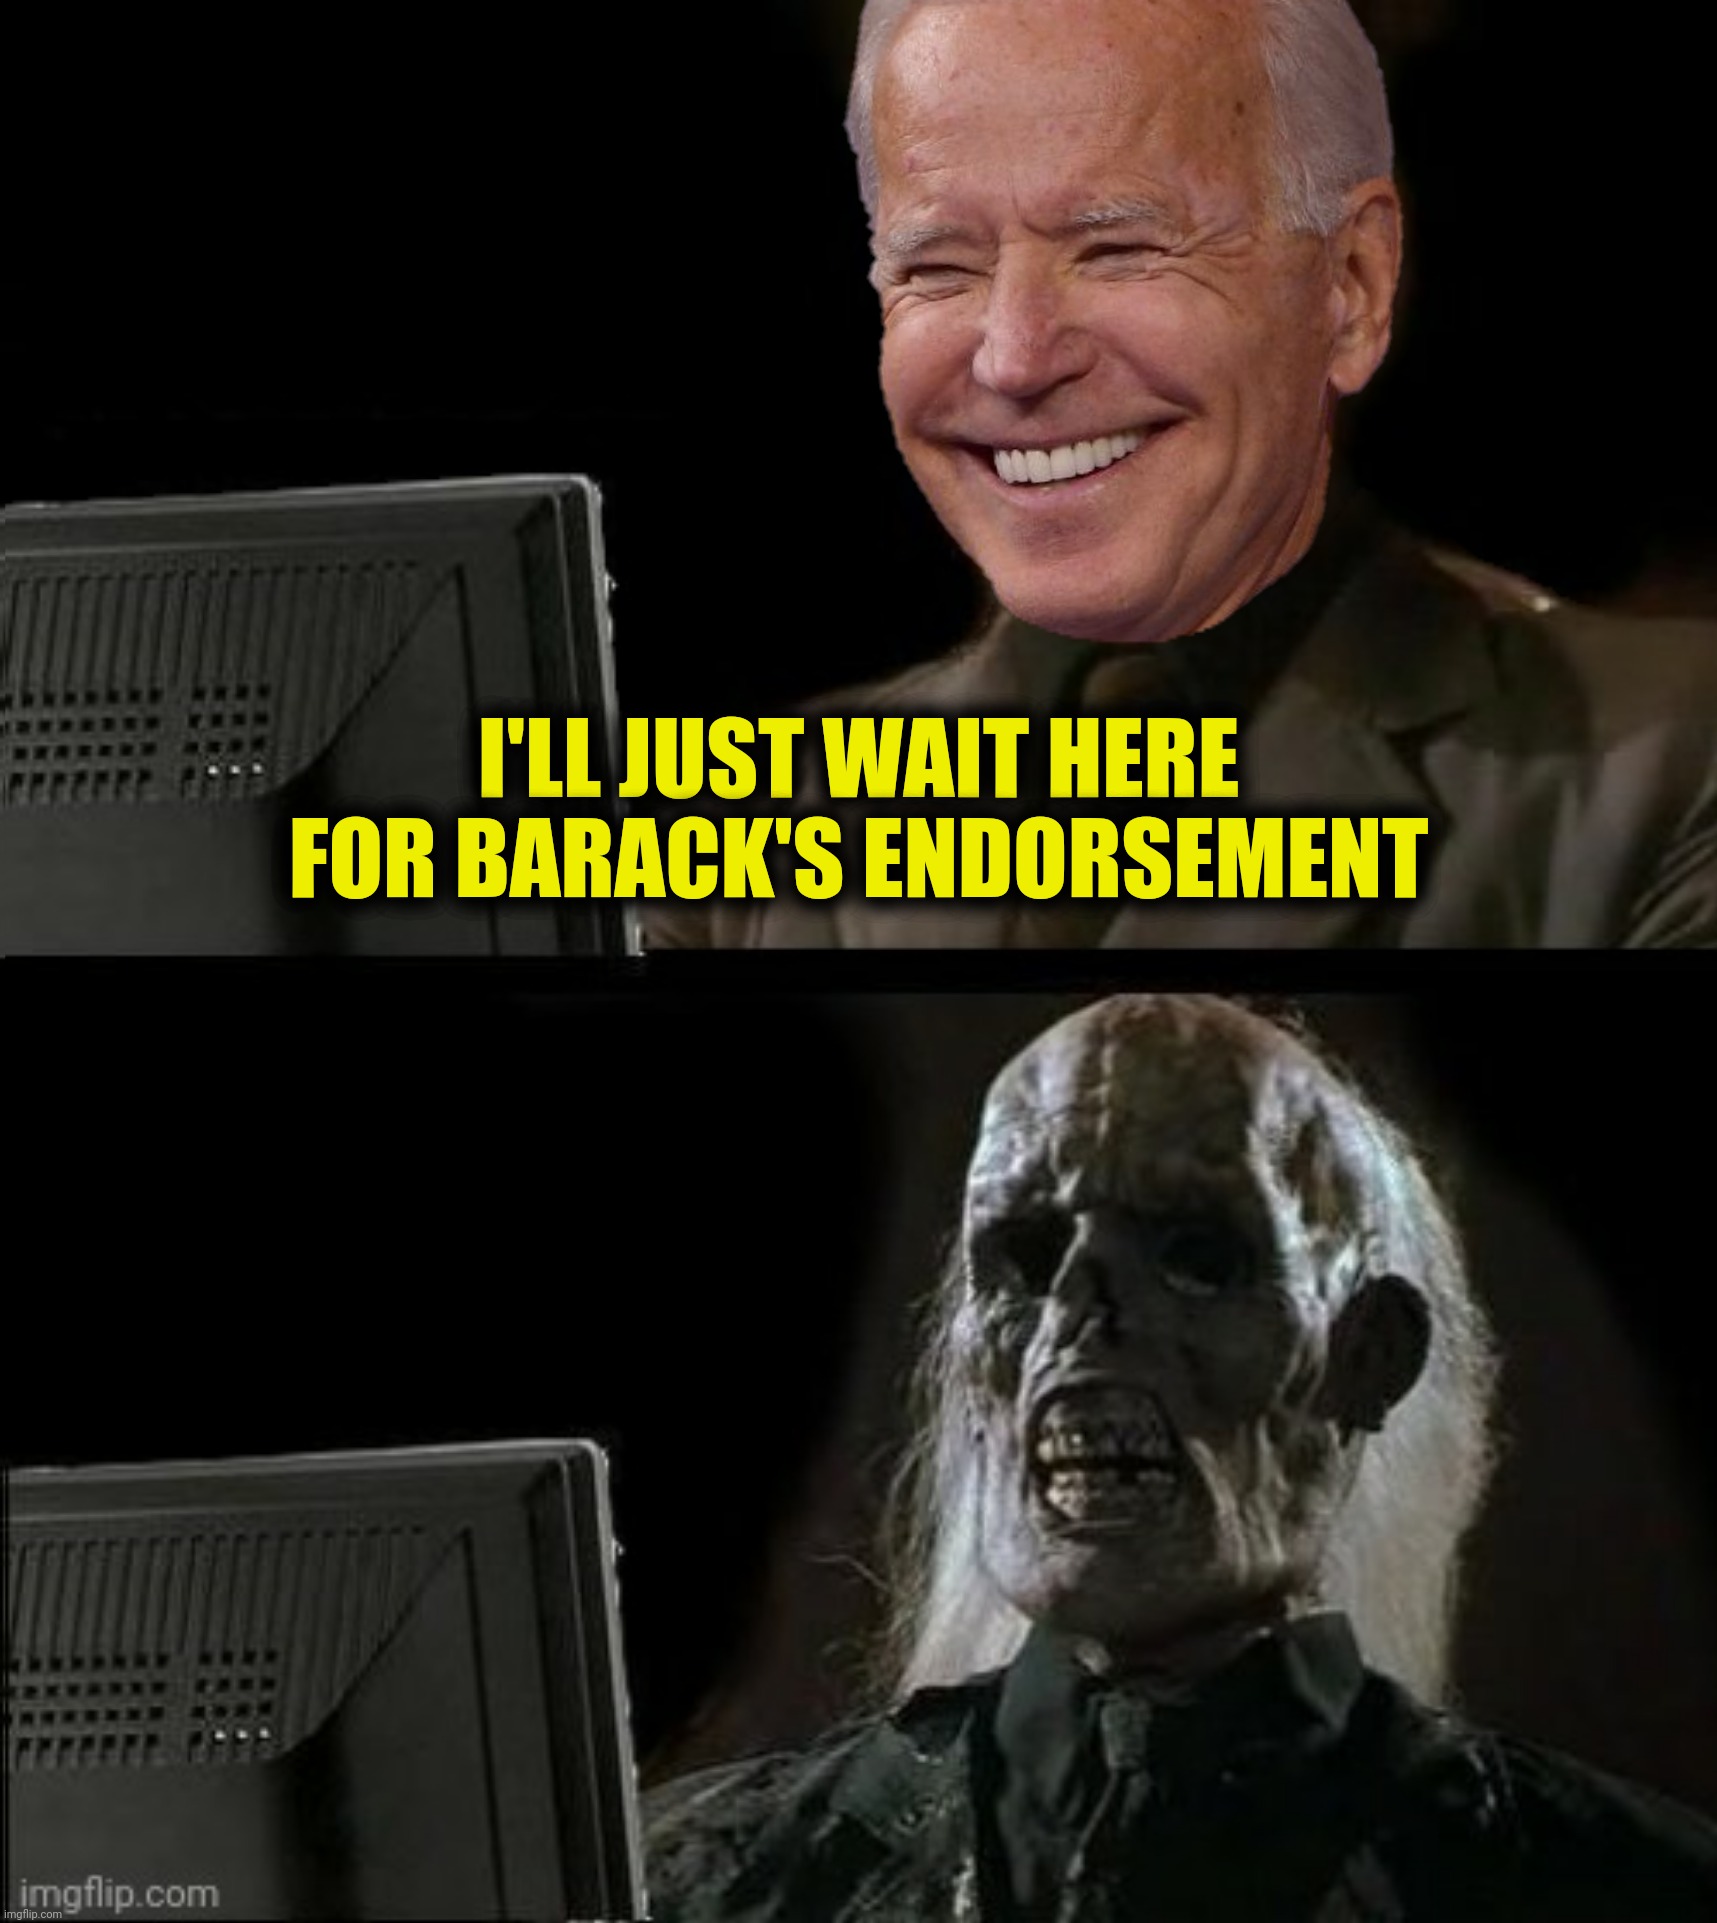 Actual time lapse:  2 days | I'LL JUST WAIT HERE FOR BARACK'S ENDORSEMENT | image tagged in bad photoshop,i'll just wait here guy,joe biden,endorsement | made w/ Imgflip meme maker